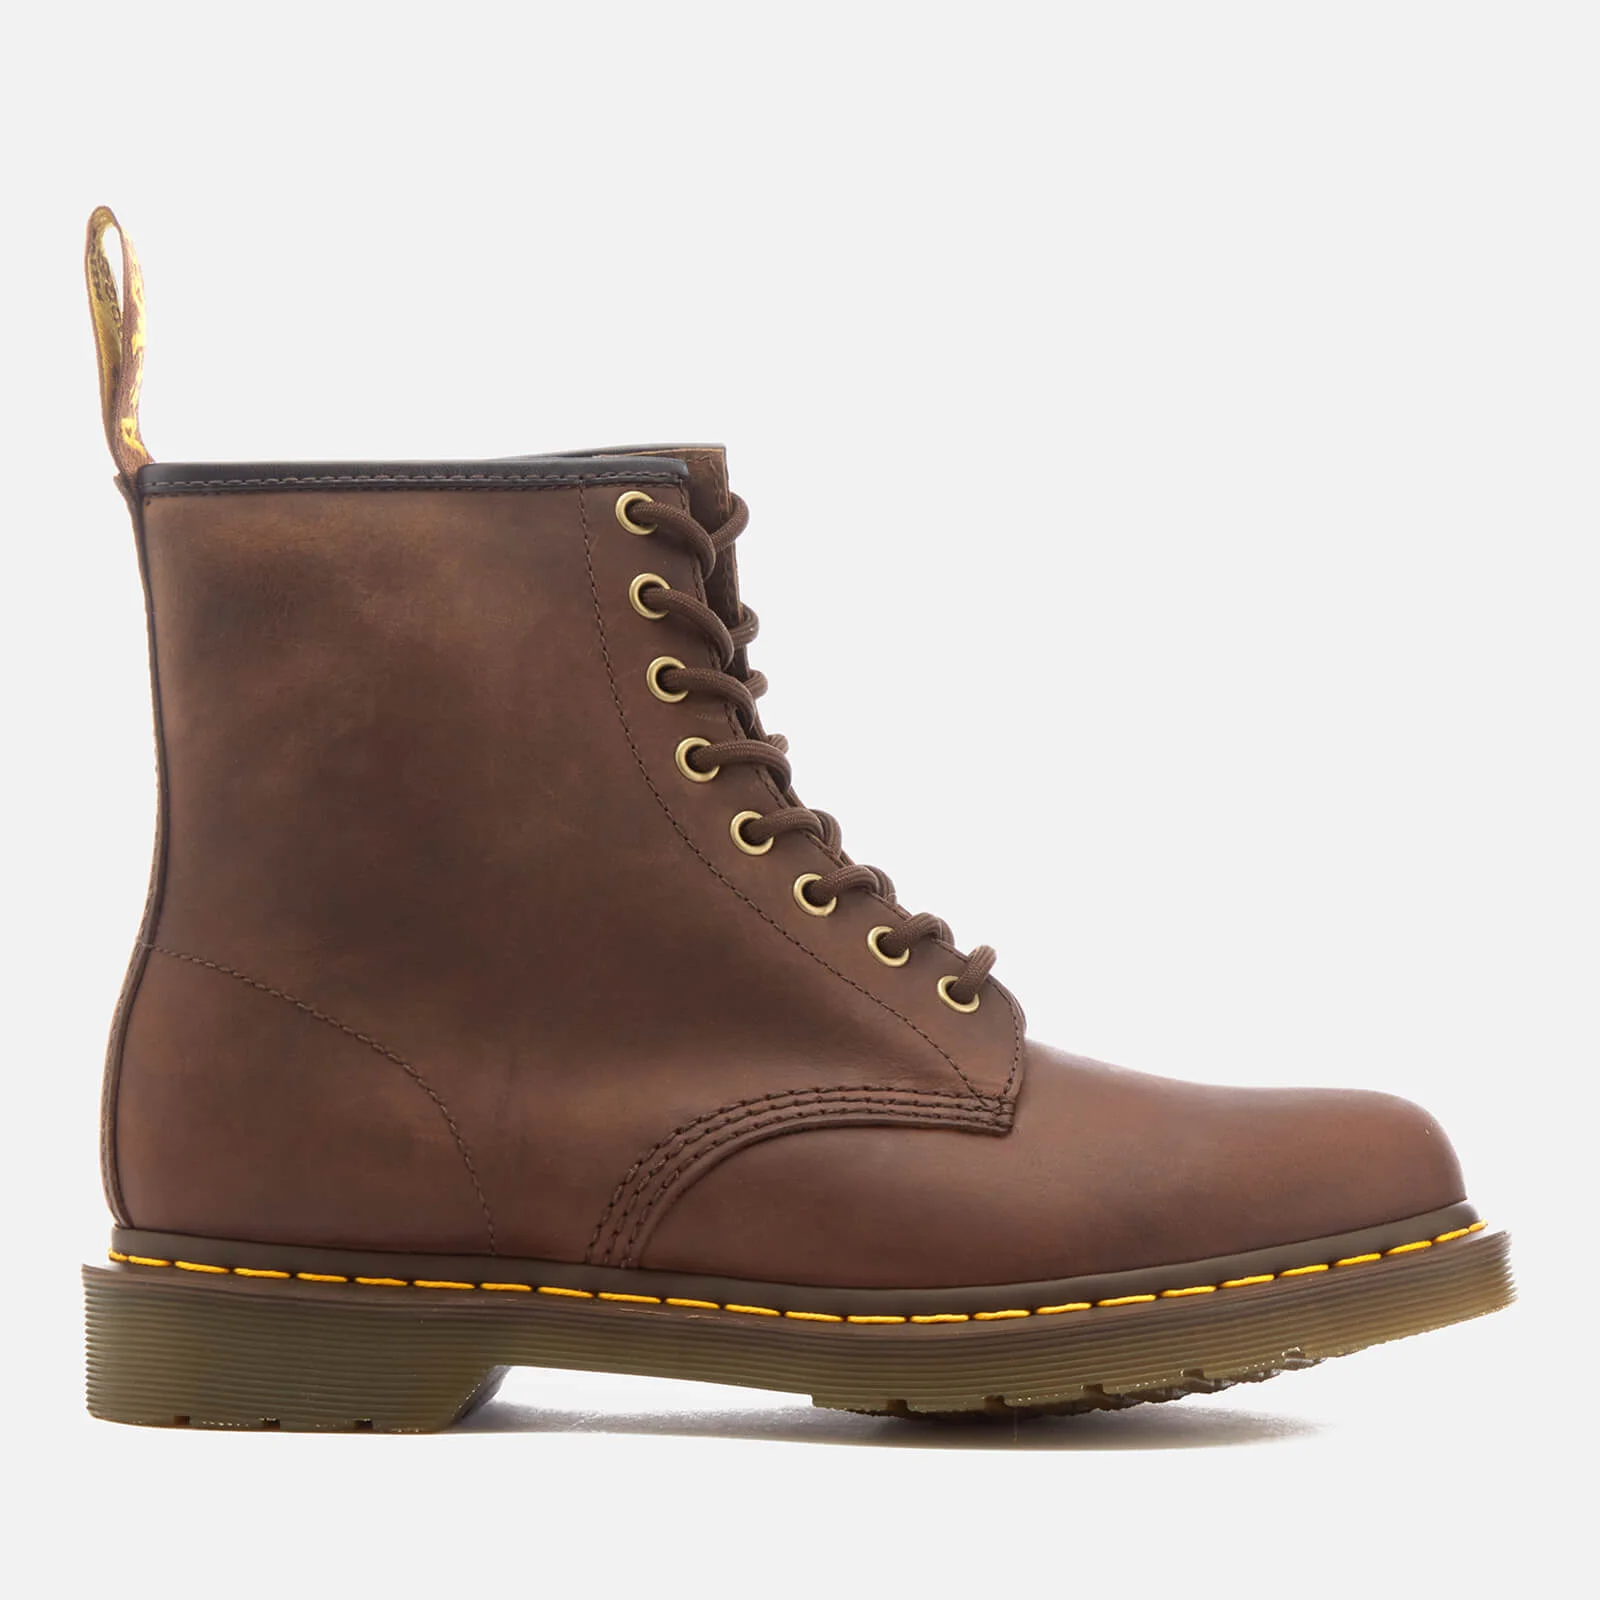 Dr. Martens Men's 1460 Crazy Horse Leather 8-Eye Lace Up Boots - Gaucho Image 1